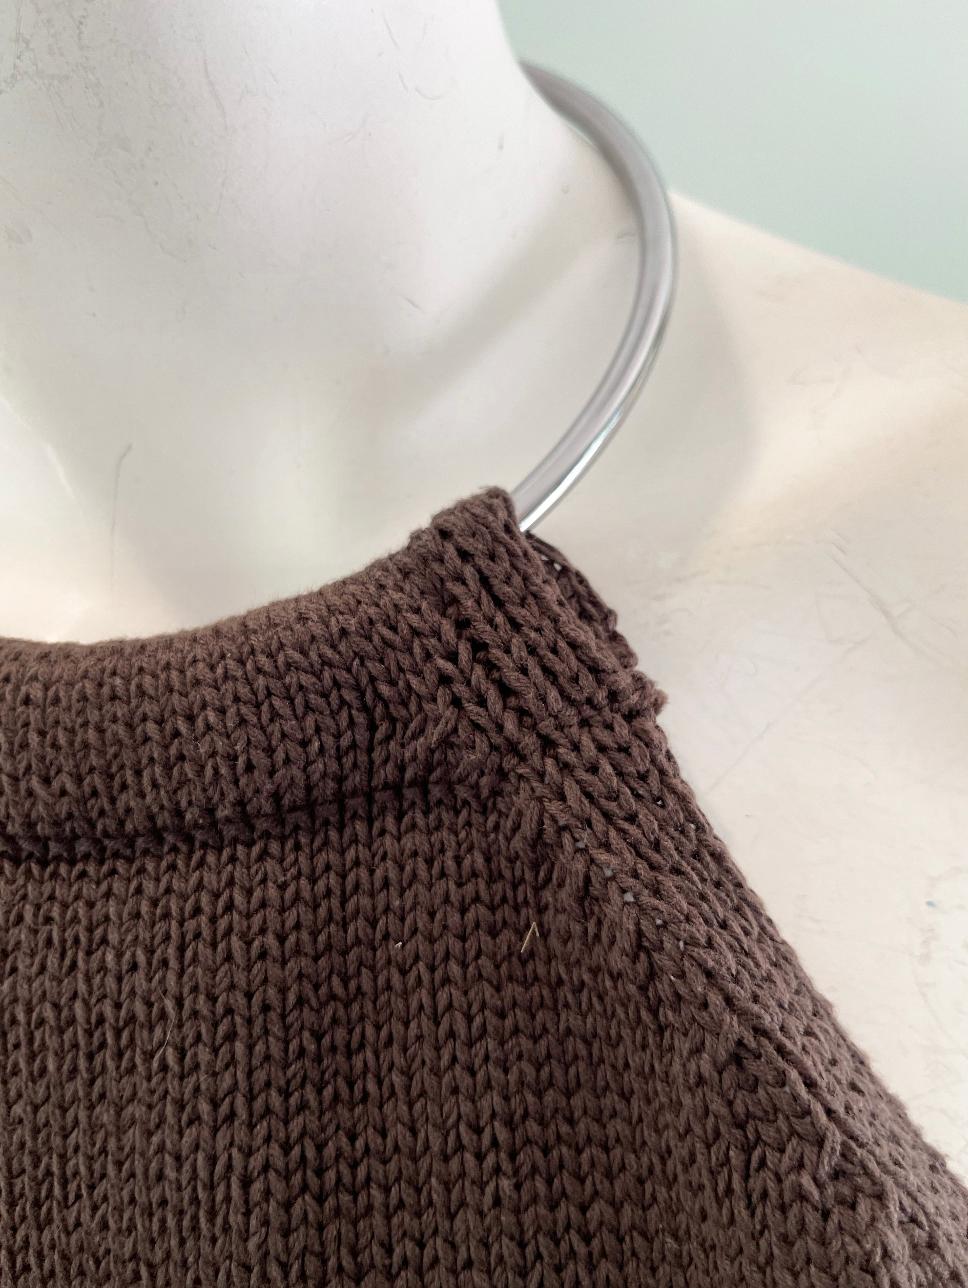 1996 Martin Margiela brown knit crop top with tie back and metal ring neck

Condition: Excellent
Bust 24